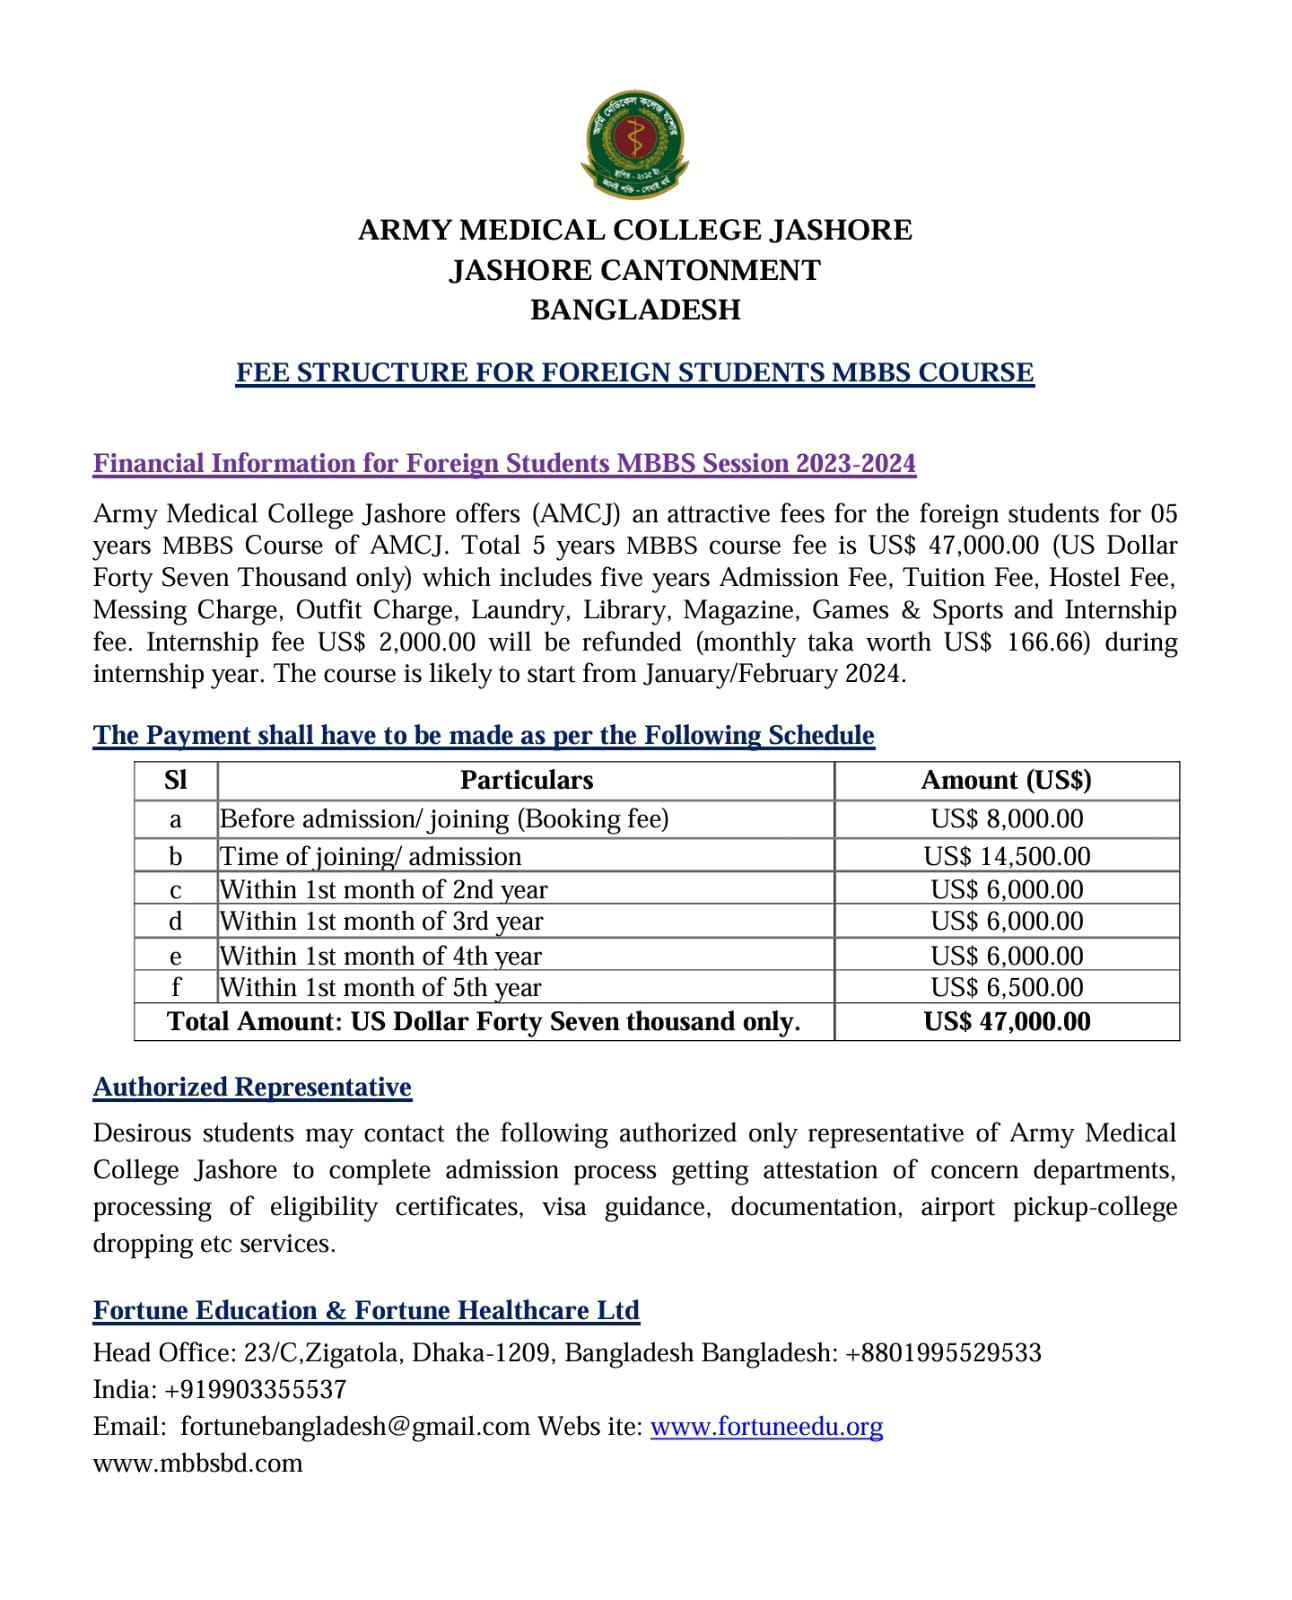 Army Medical Colleges and the role of Fortune Education